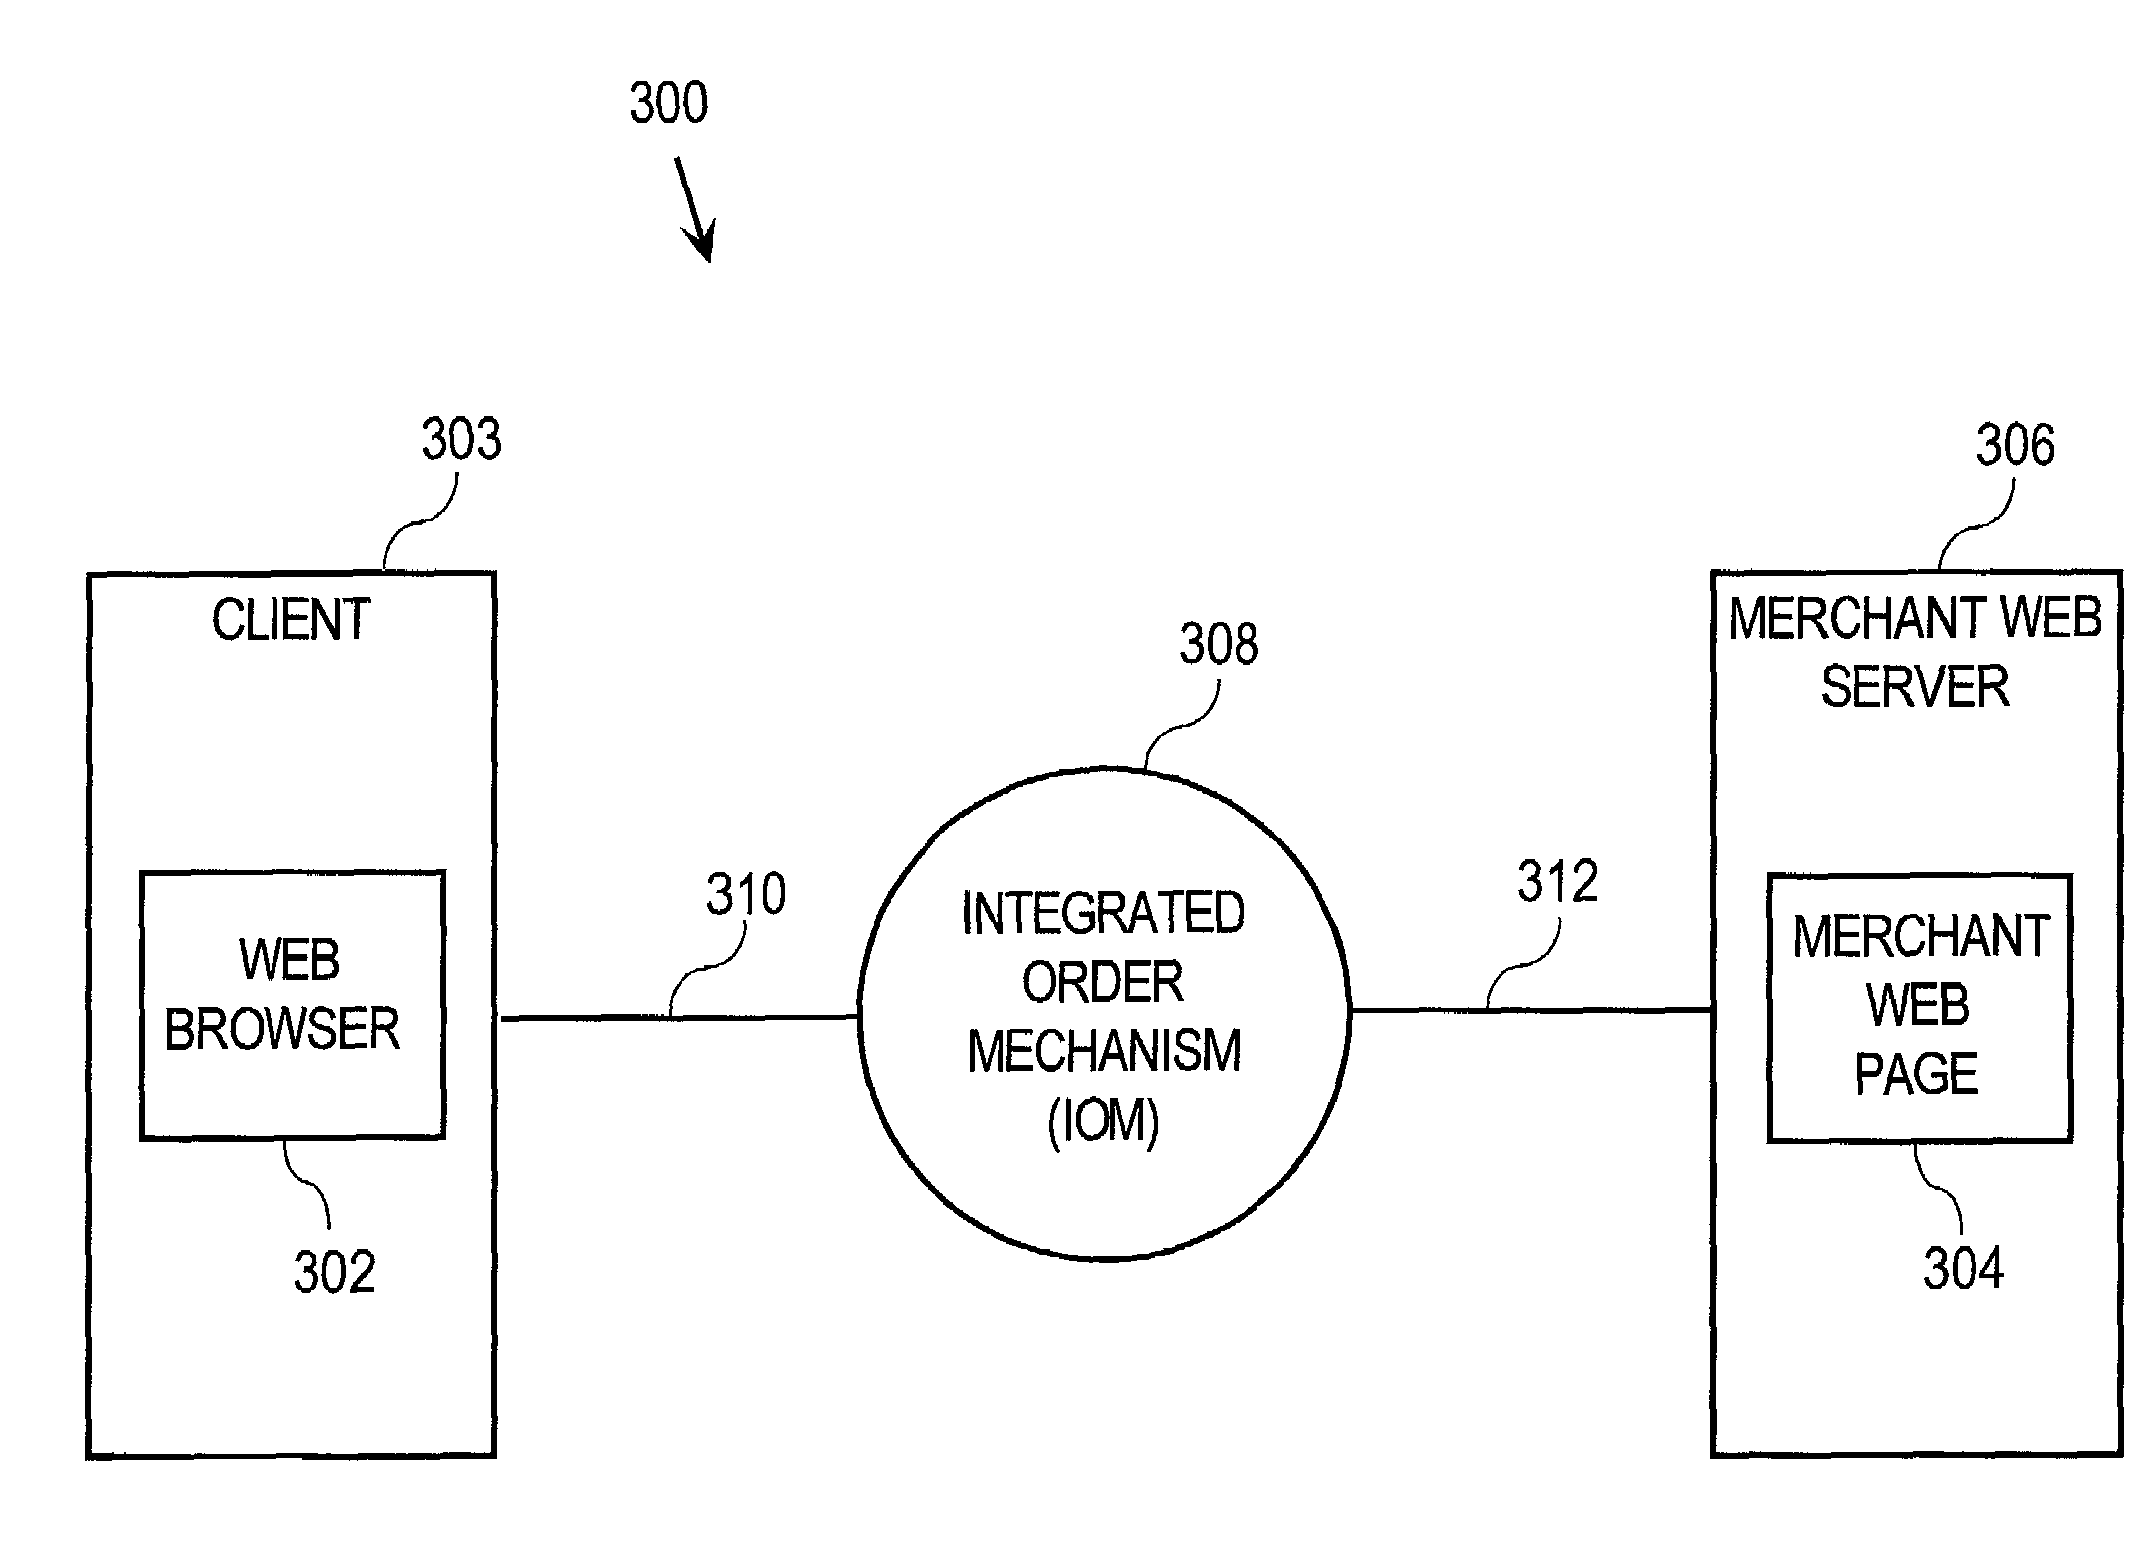 Providing navigation objects for communications over a network